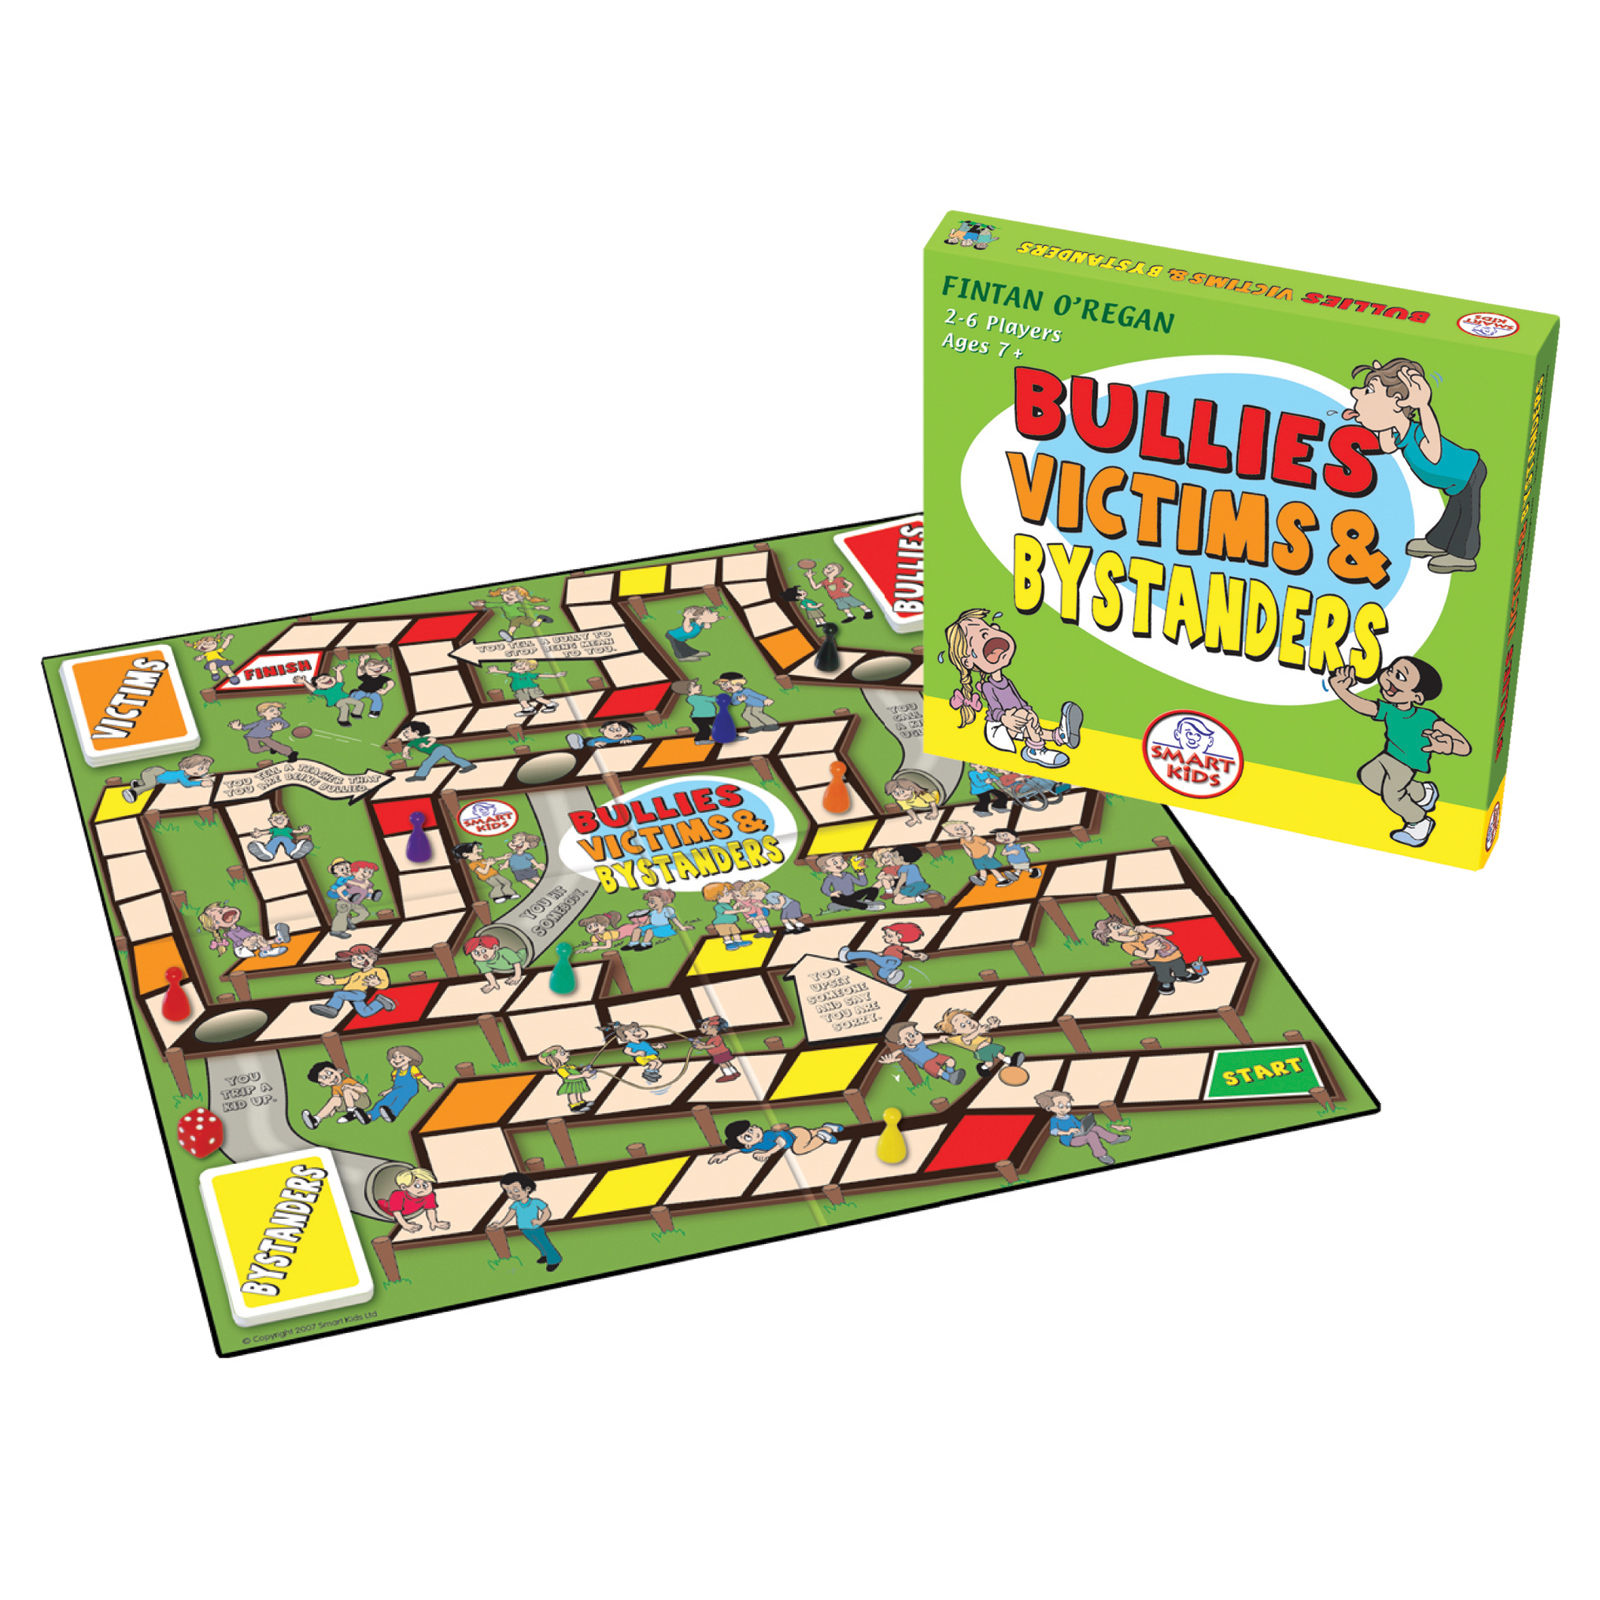 Didax Bullies, Victims & Bystanders Board Game